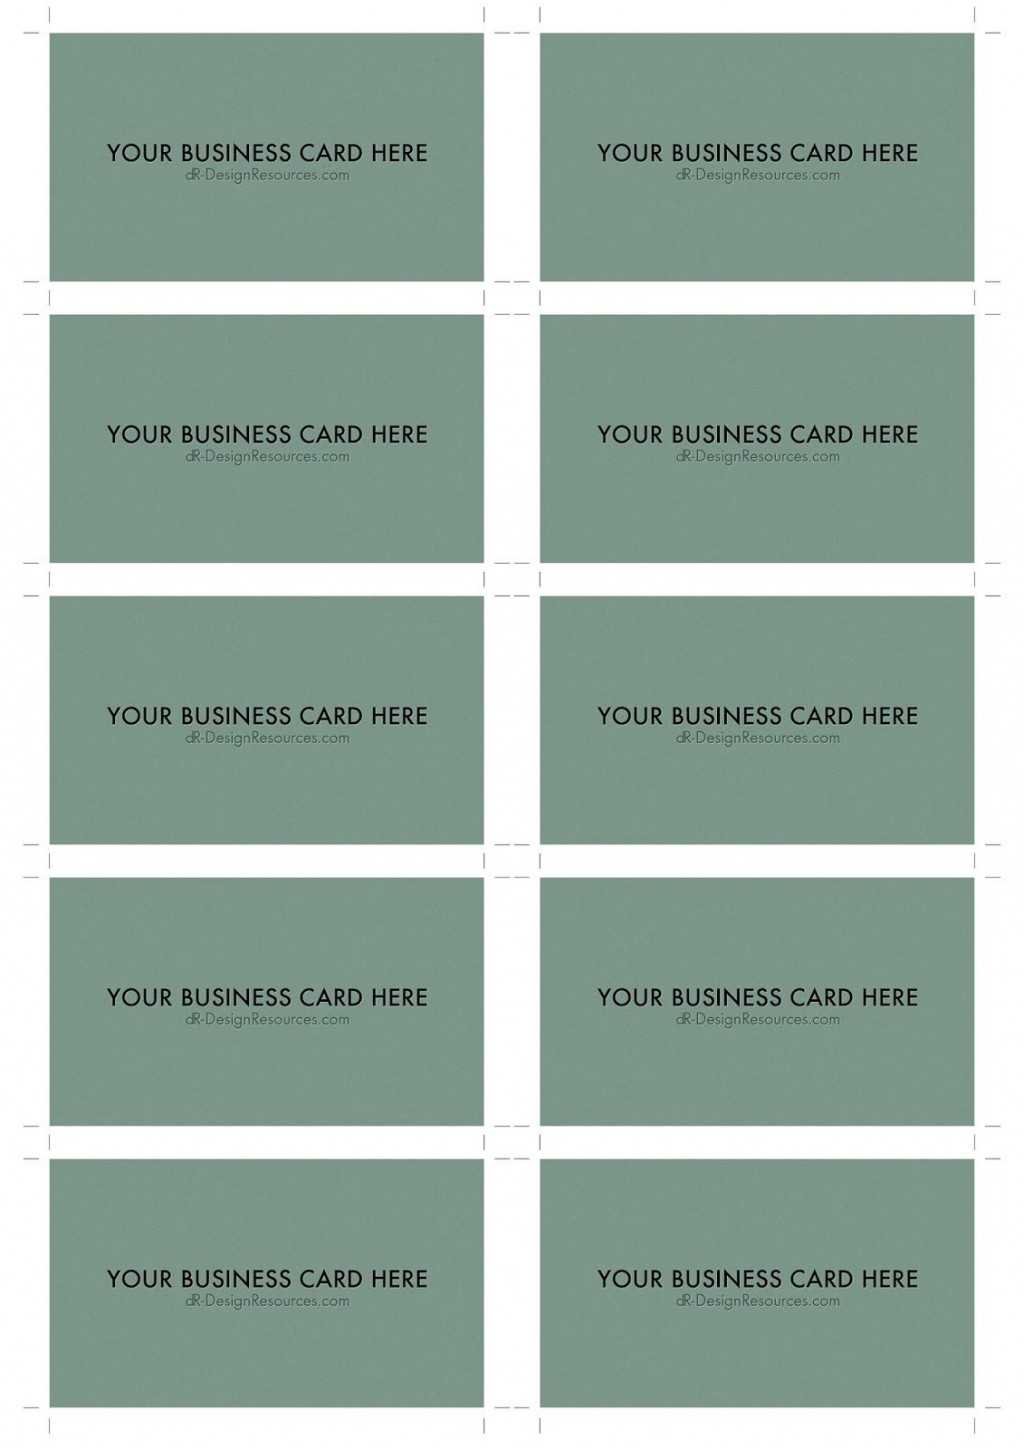 012 Photoshop Business Card Template Ideas Free Real Estate In Business Card Size Photoshop Template